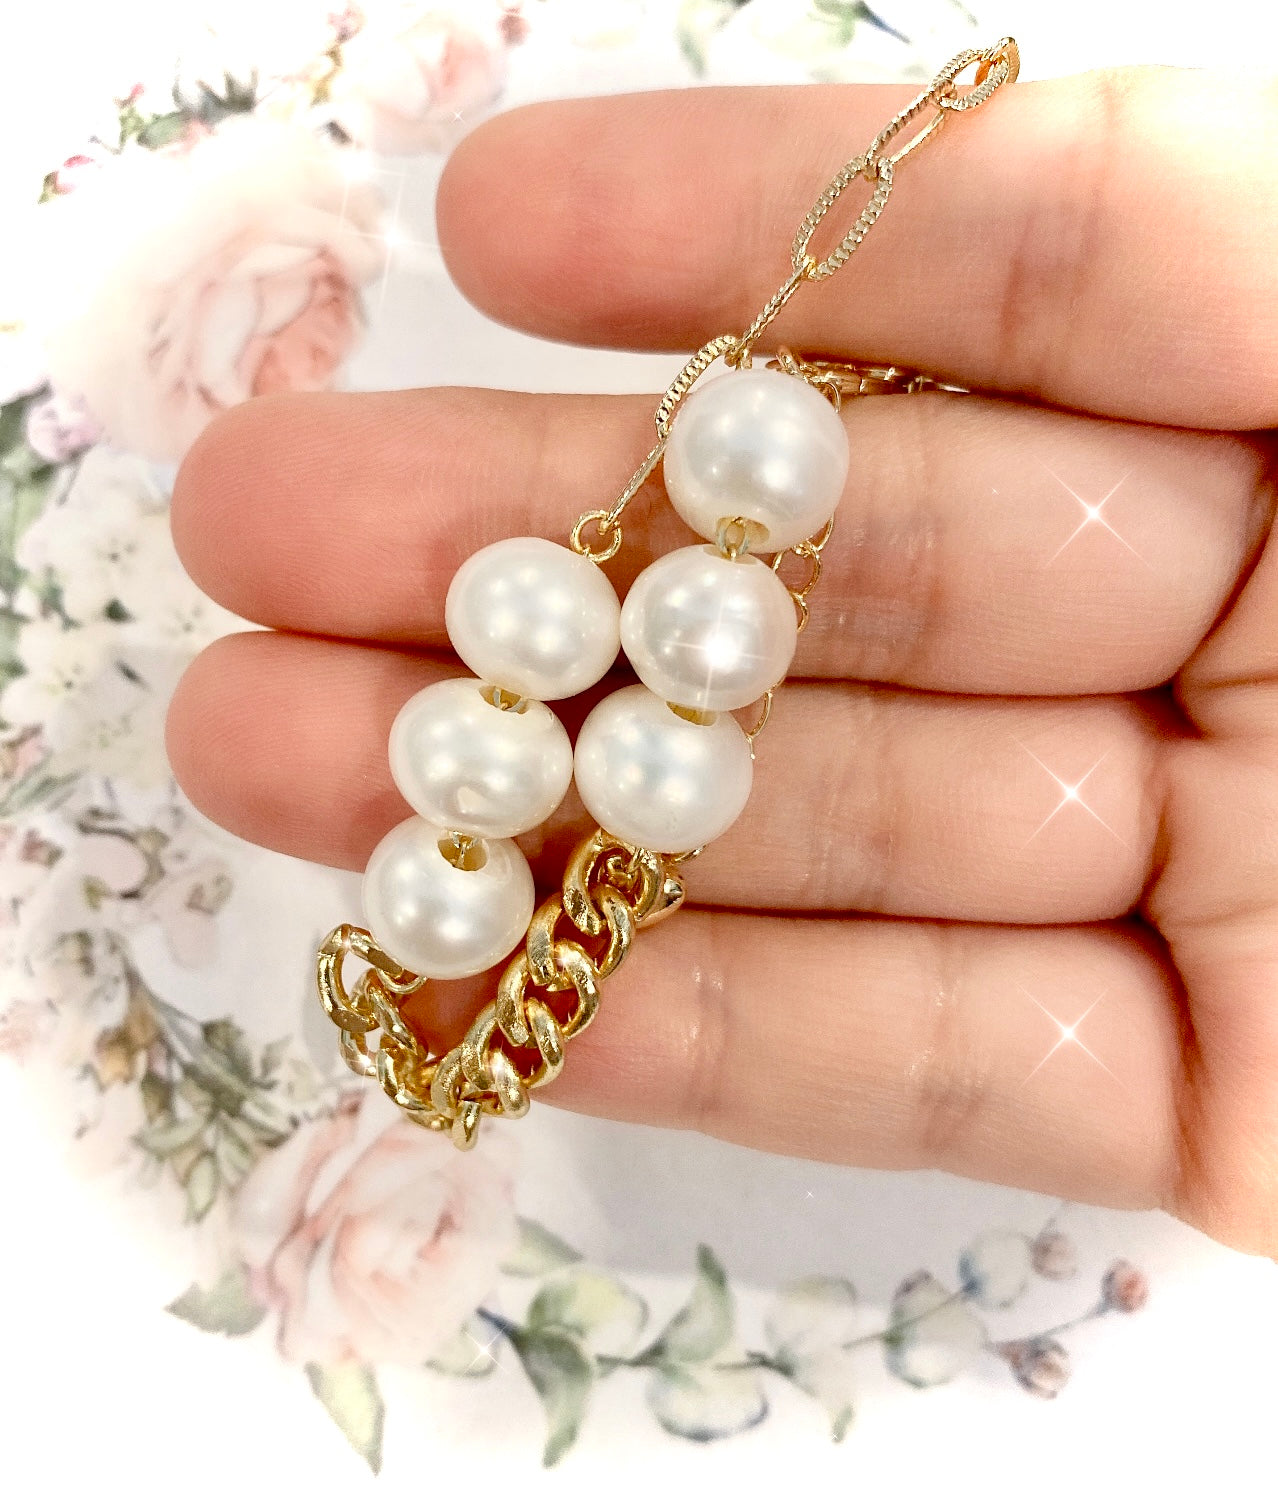 Pearly Chain Chic Bracelet